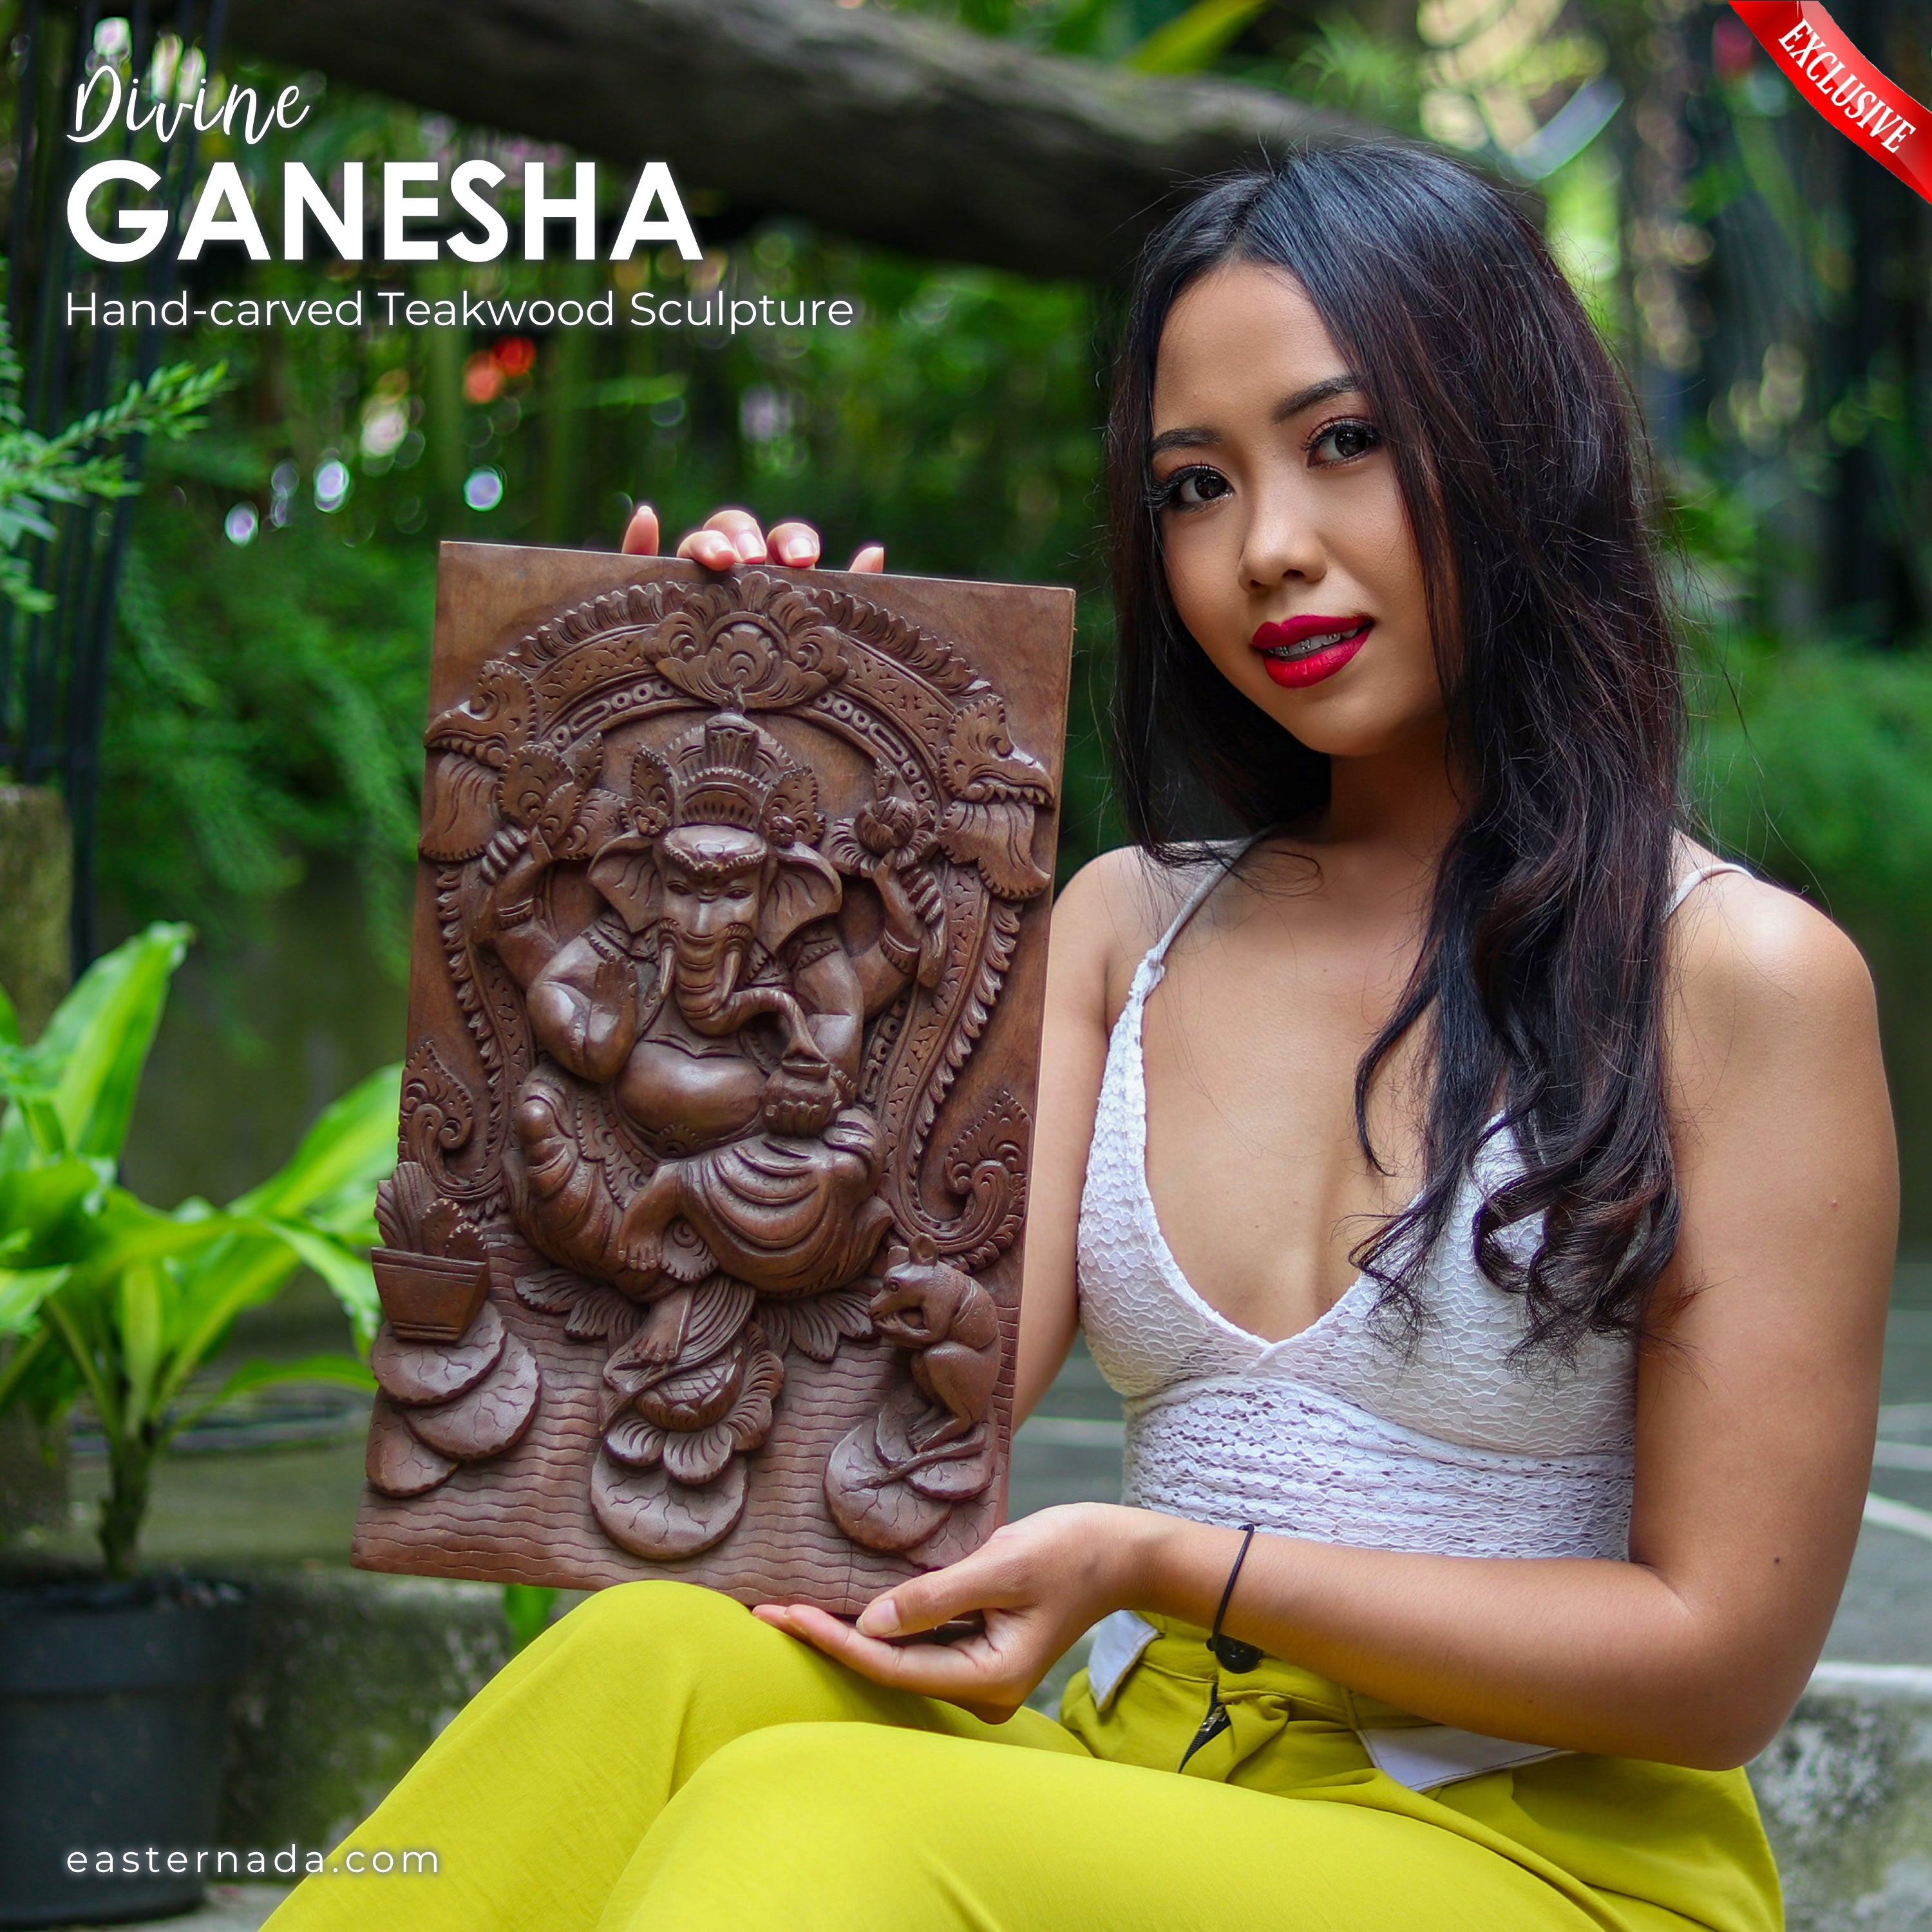 This is a stunning hand-carved teakwood Ganesha Ganapati Hindu God statue that depicts Divine Ganesha in all his glory. The intricate carving and attention to detail make this statue a true work of art.